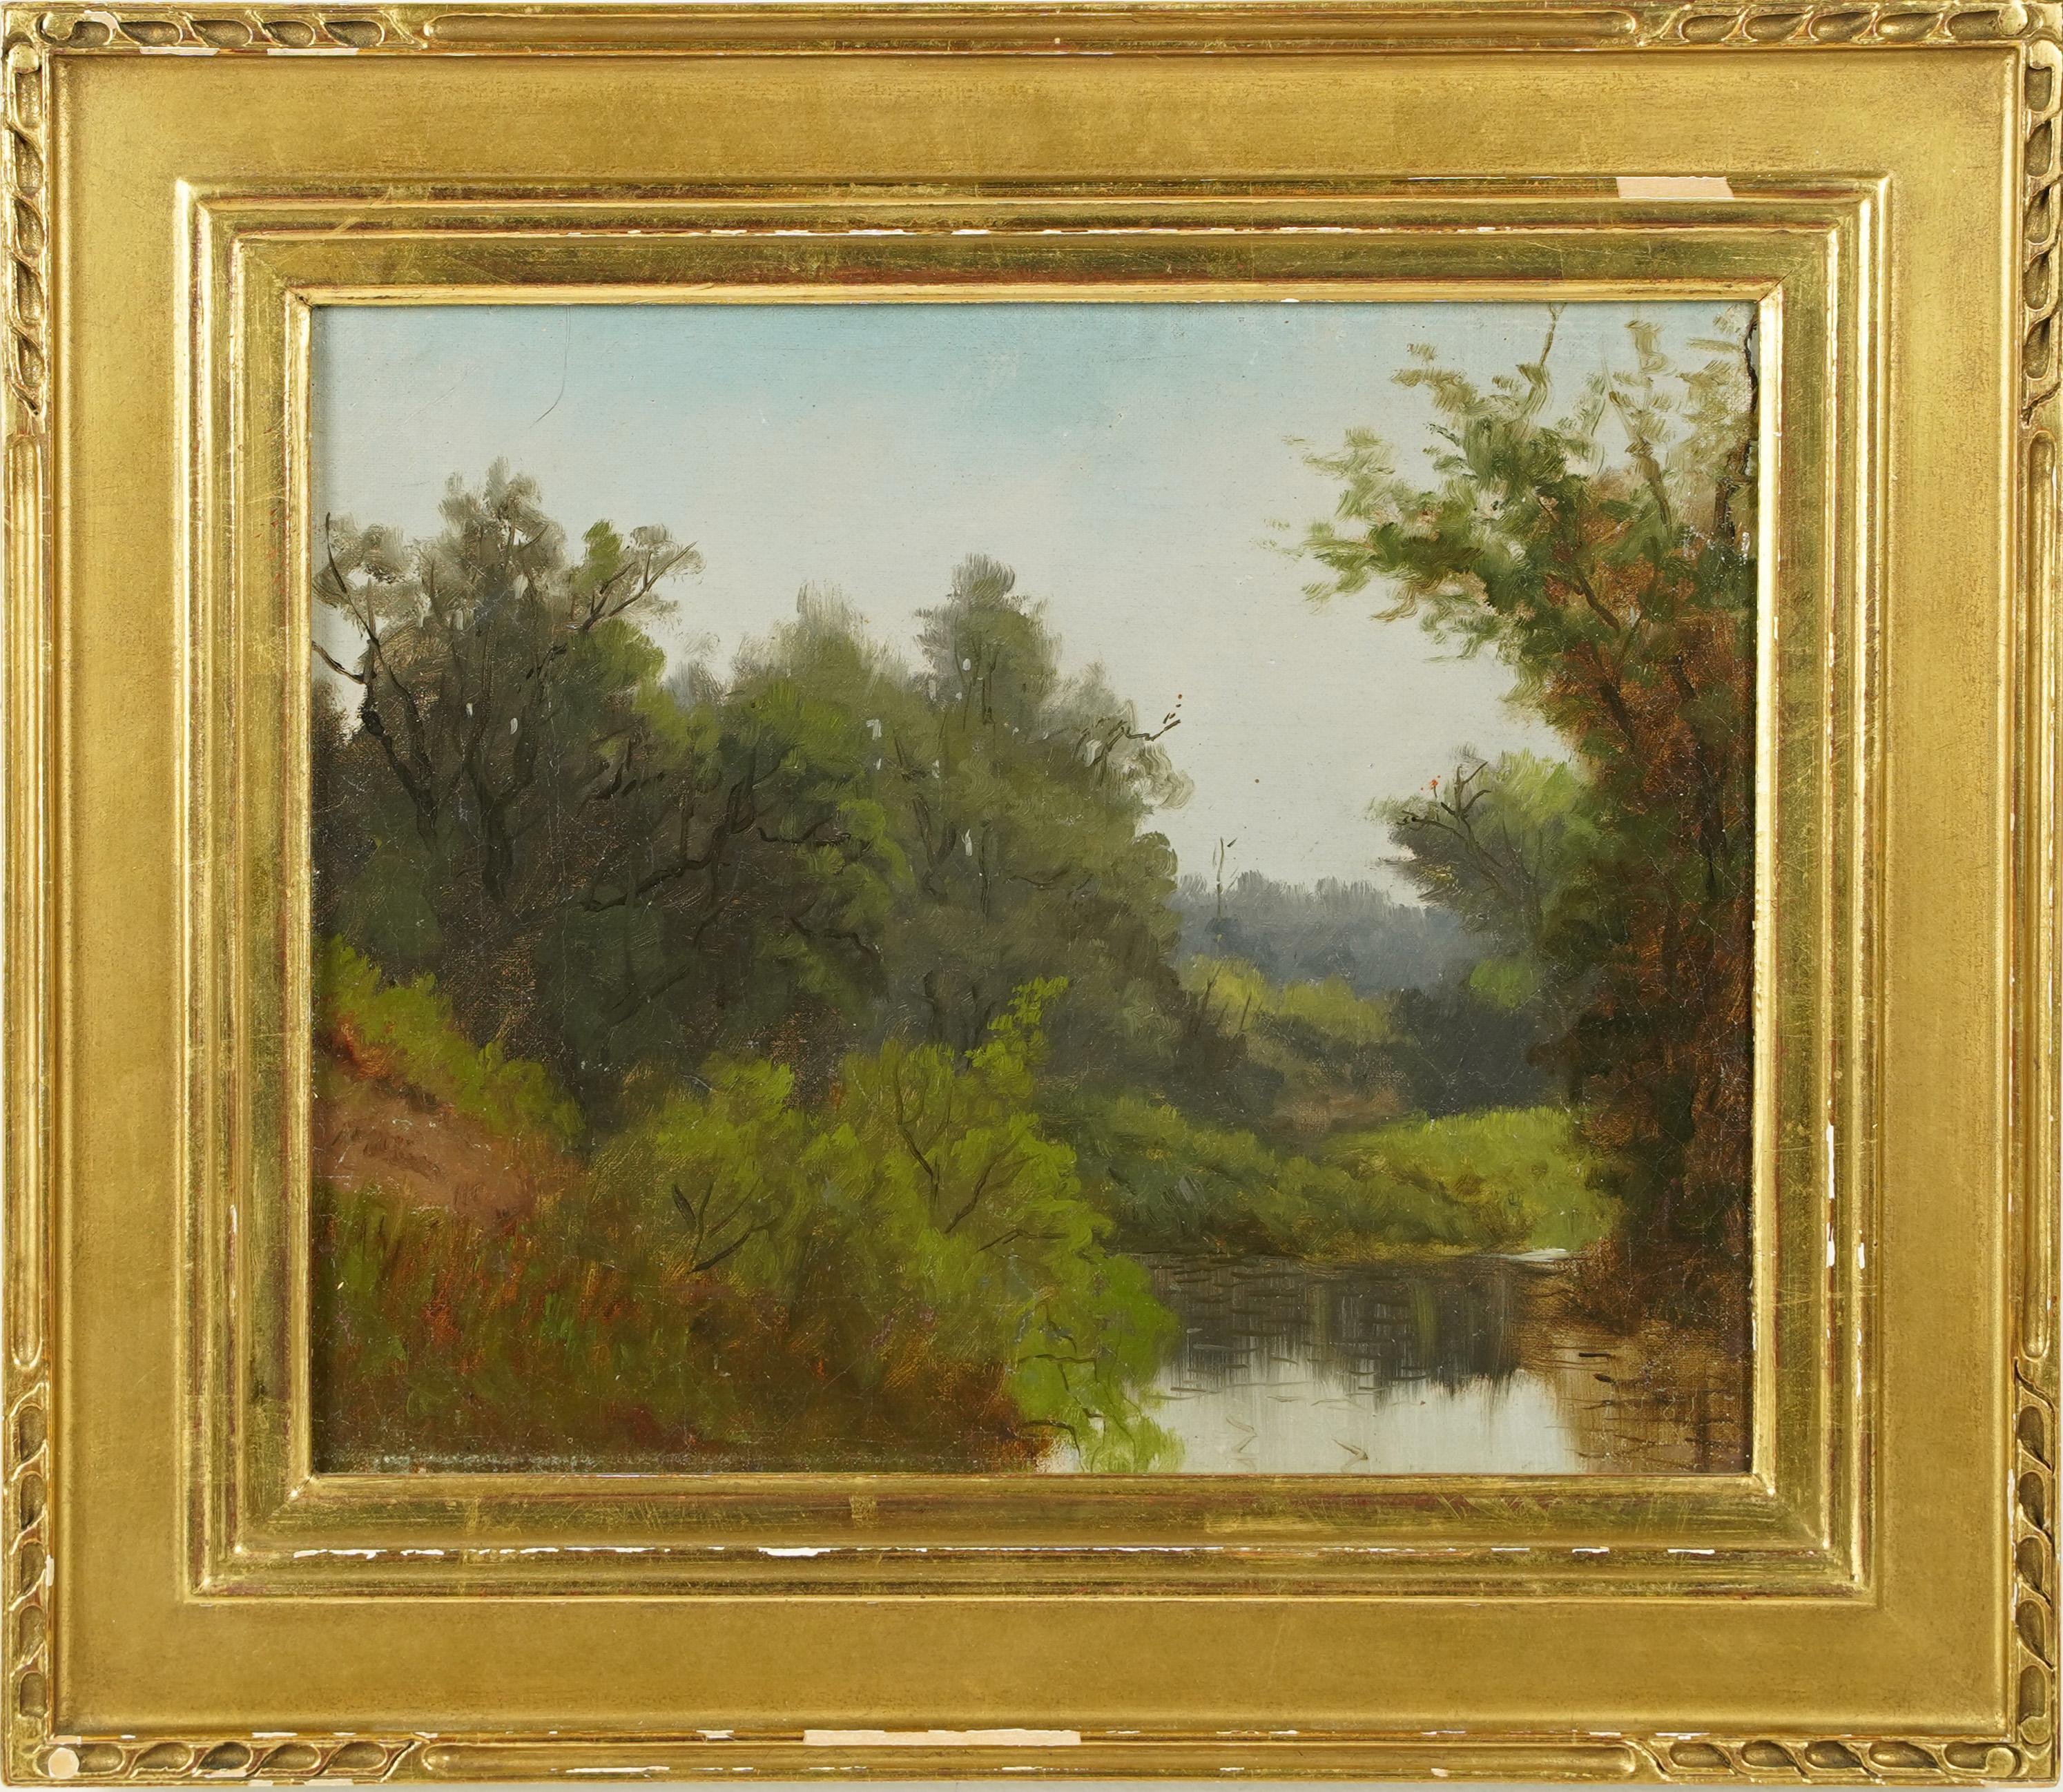 Antique American landscape oil painting.  Oil on canvas. Framed.  Image size, 11L x 9H.